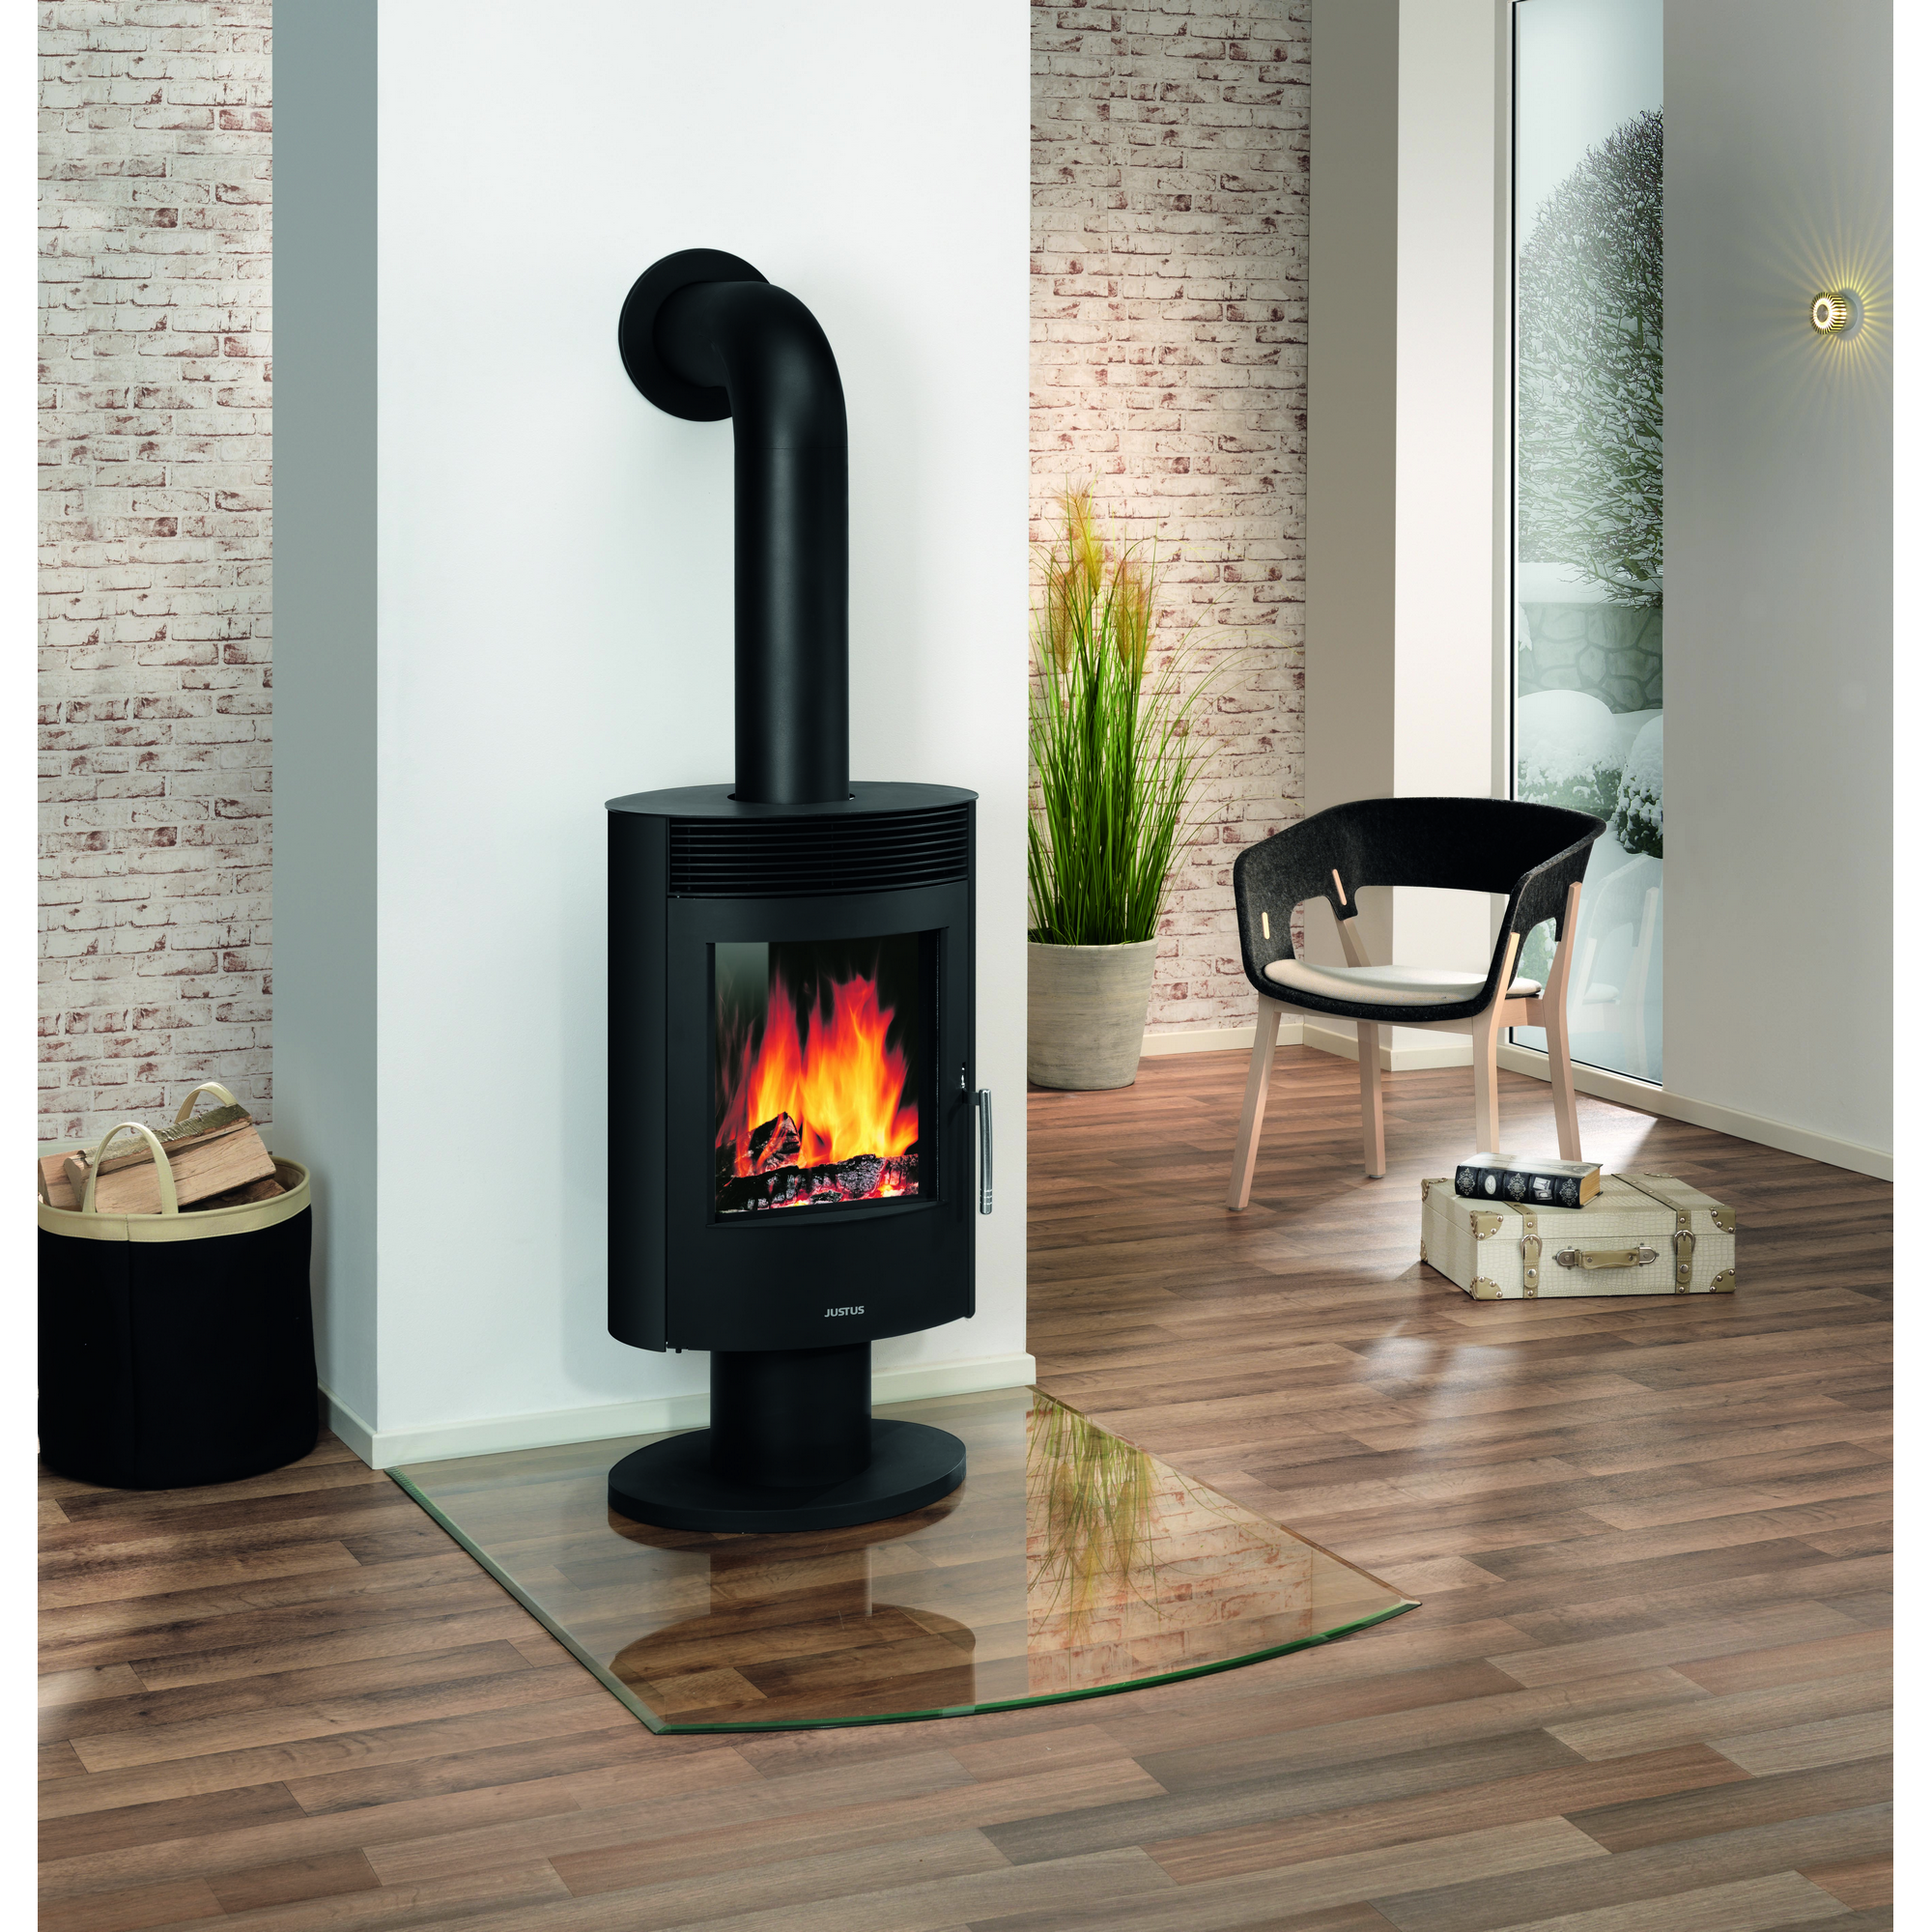 Kaminofen 'Seeland' Stahl 5 kW + product picture